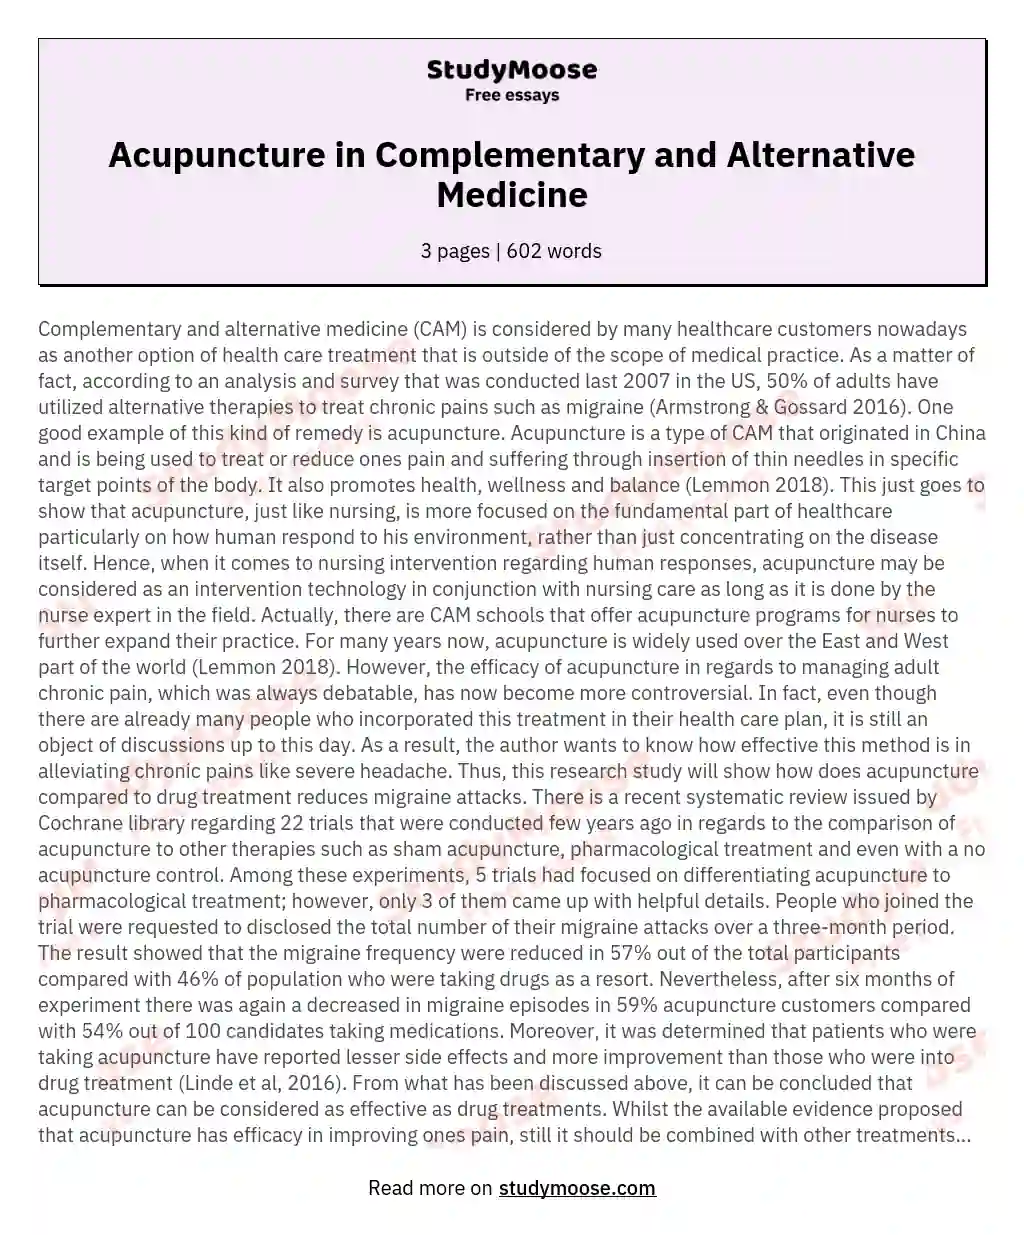 Acupuncture in Complementary and Alternative Medicine